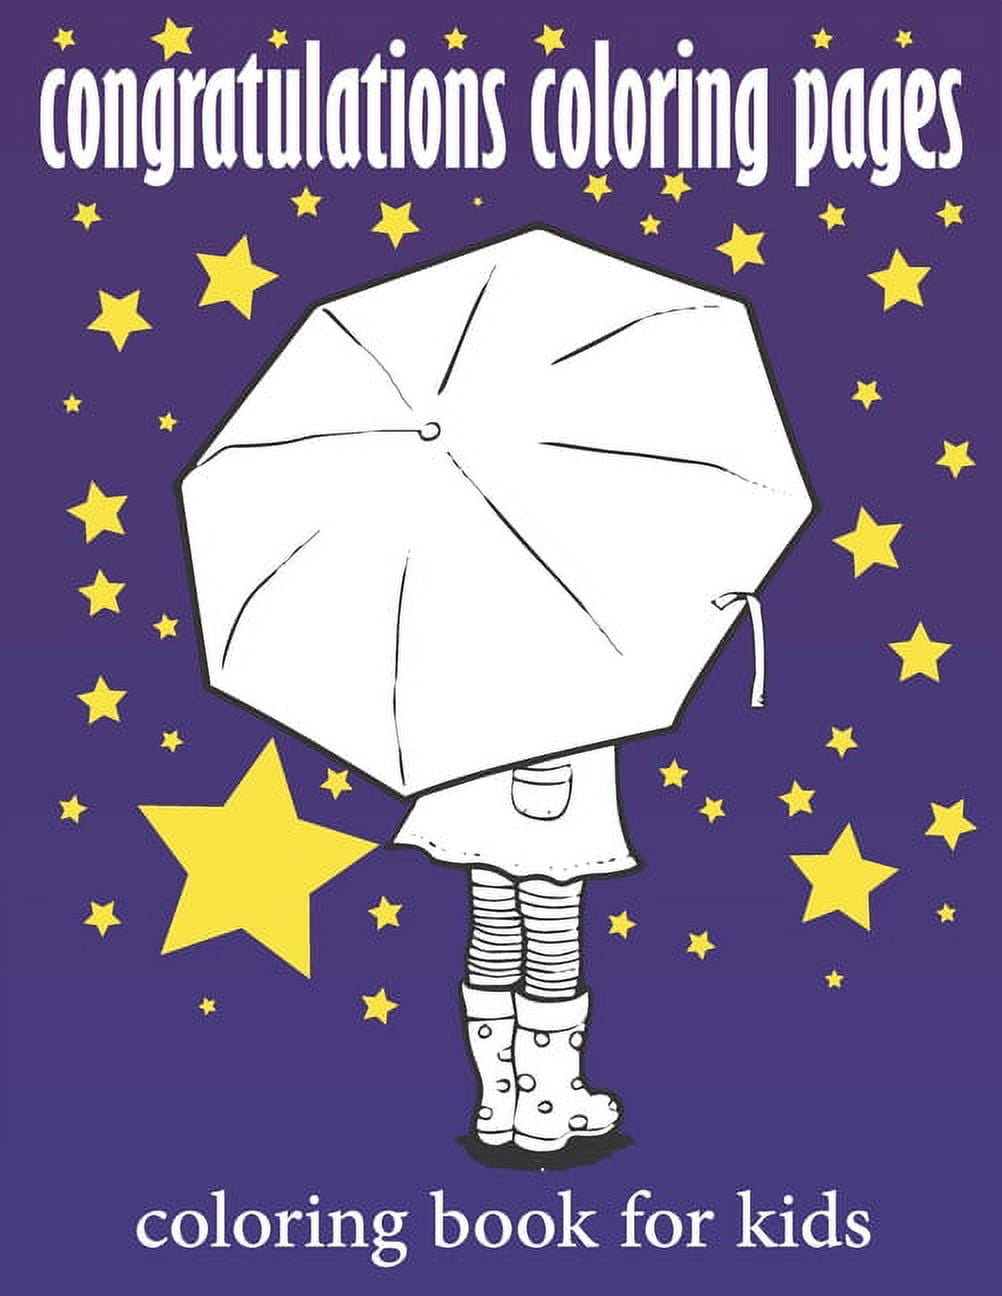 Congratulations coloring pages coloring book for kids the art of positivity coloring book for children ã inch pages coloring book for preschoolers preschool coloring book for kids